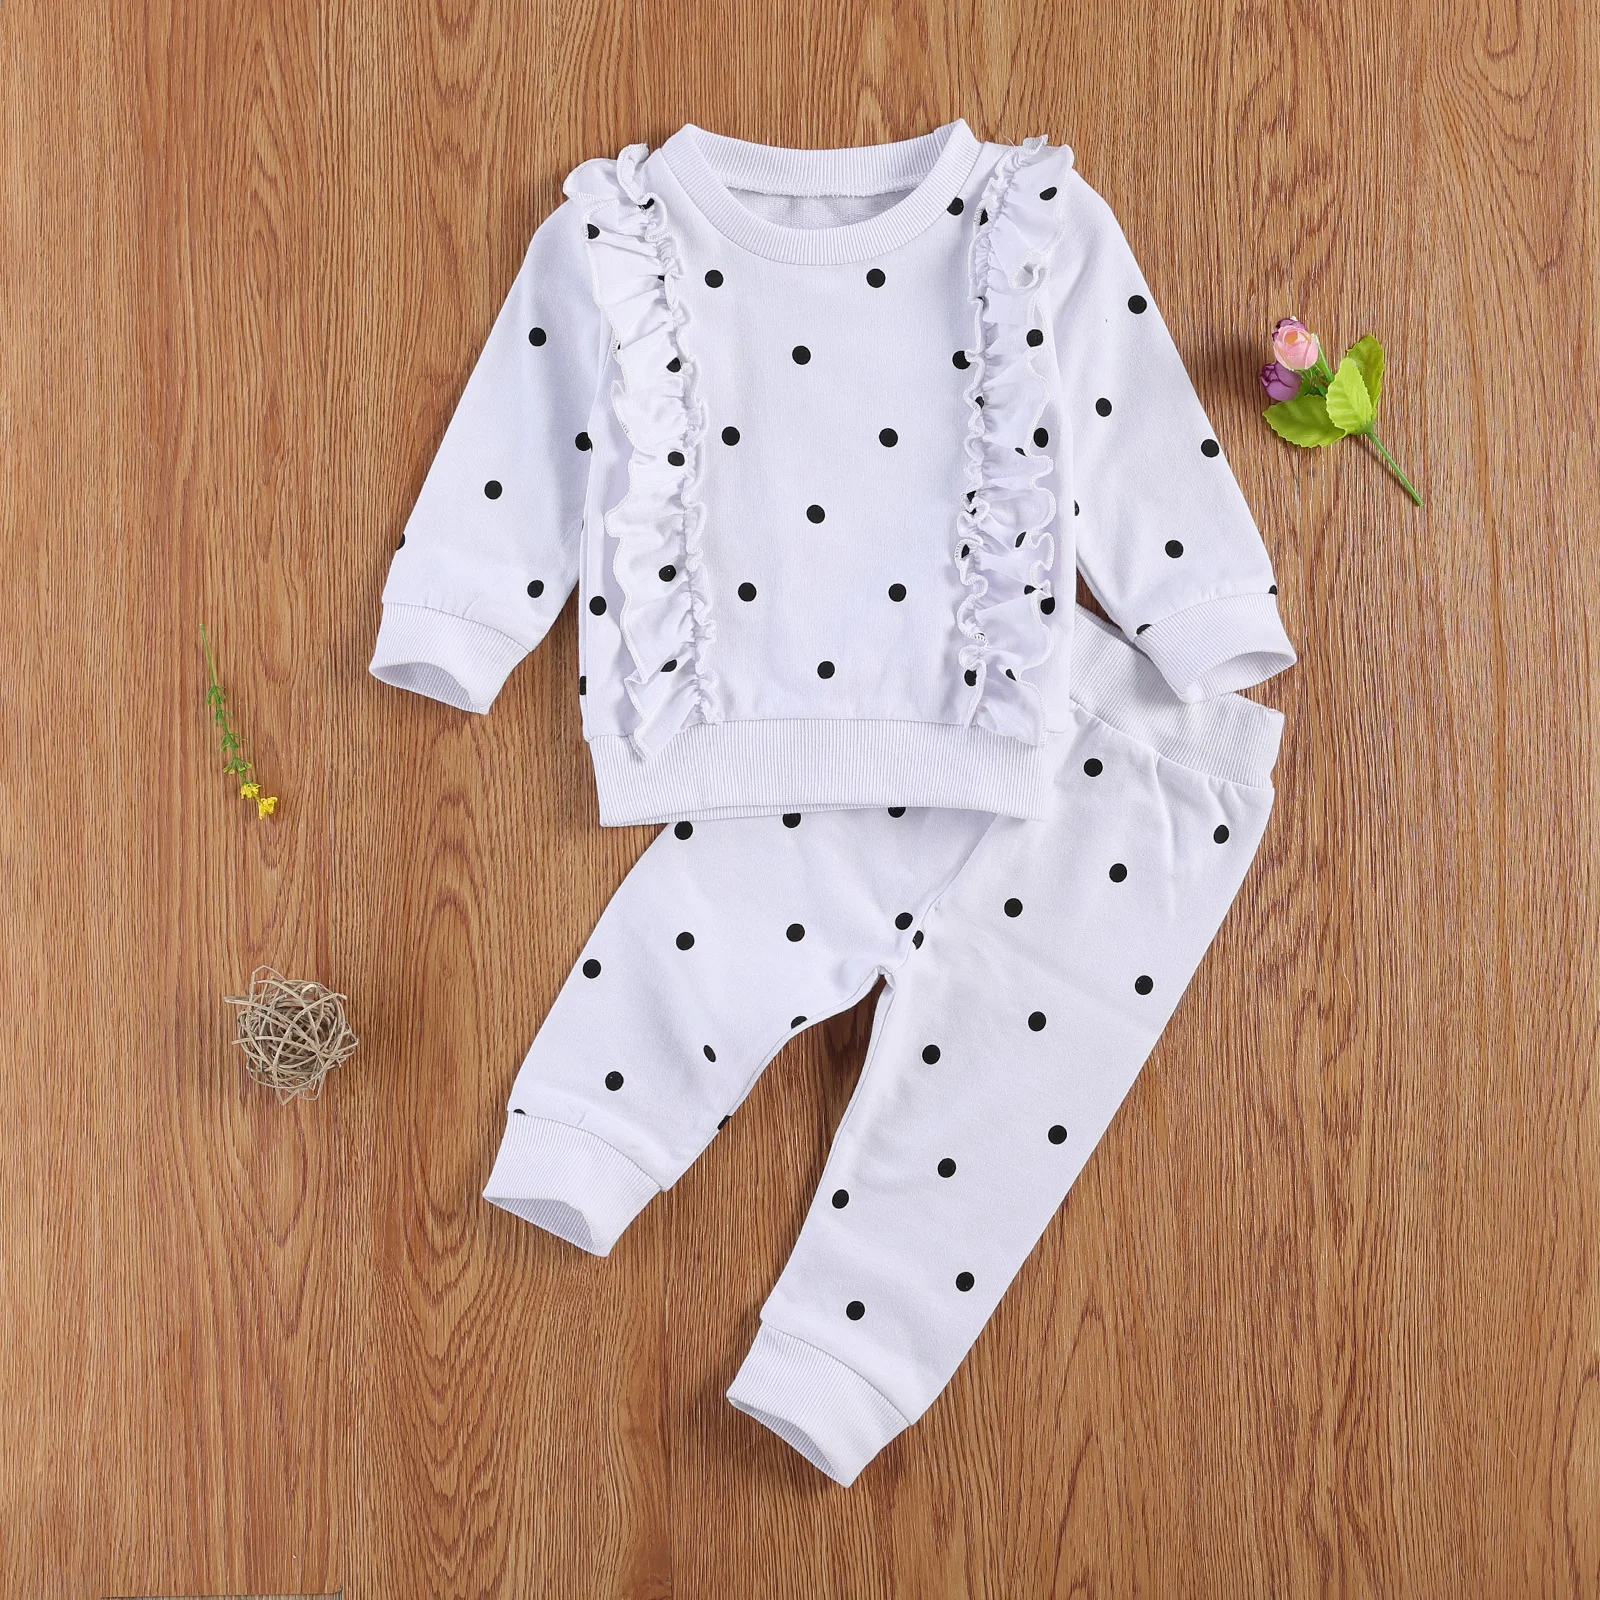 

Pudcoco Newborn Baby Clothes Autumn Long Sleeve Crew Neck Polka Dots Ruffle Tops Long Pants 2Pcs Outfits Baby Boy Girl 0-24M